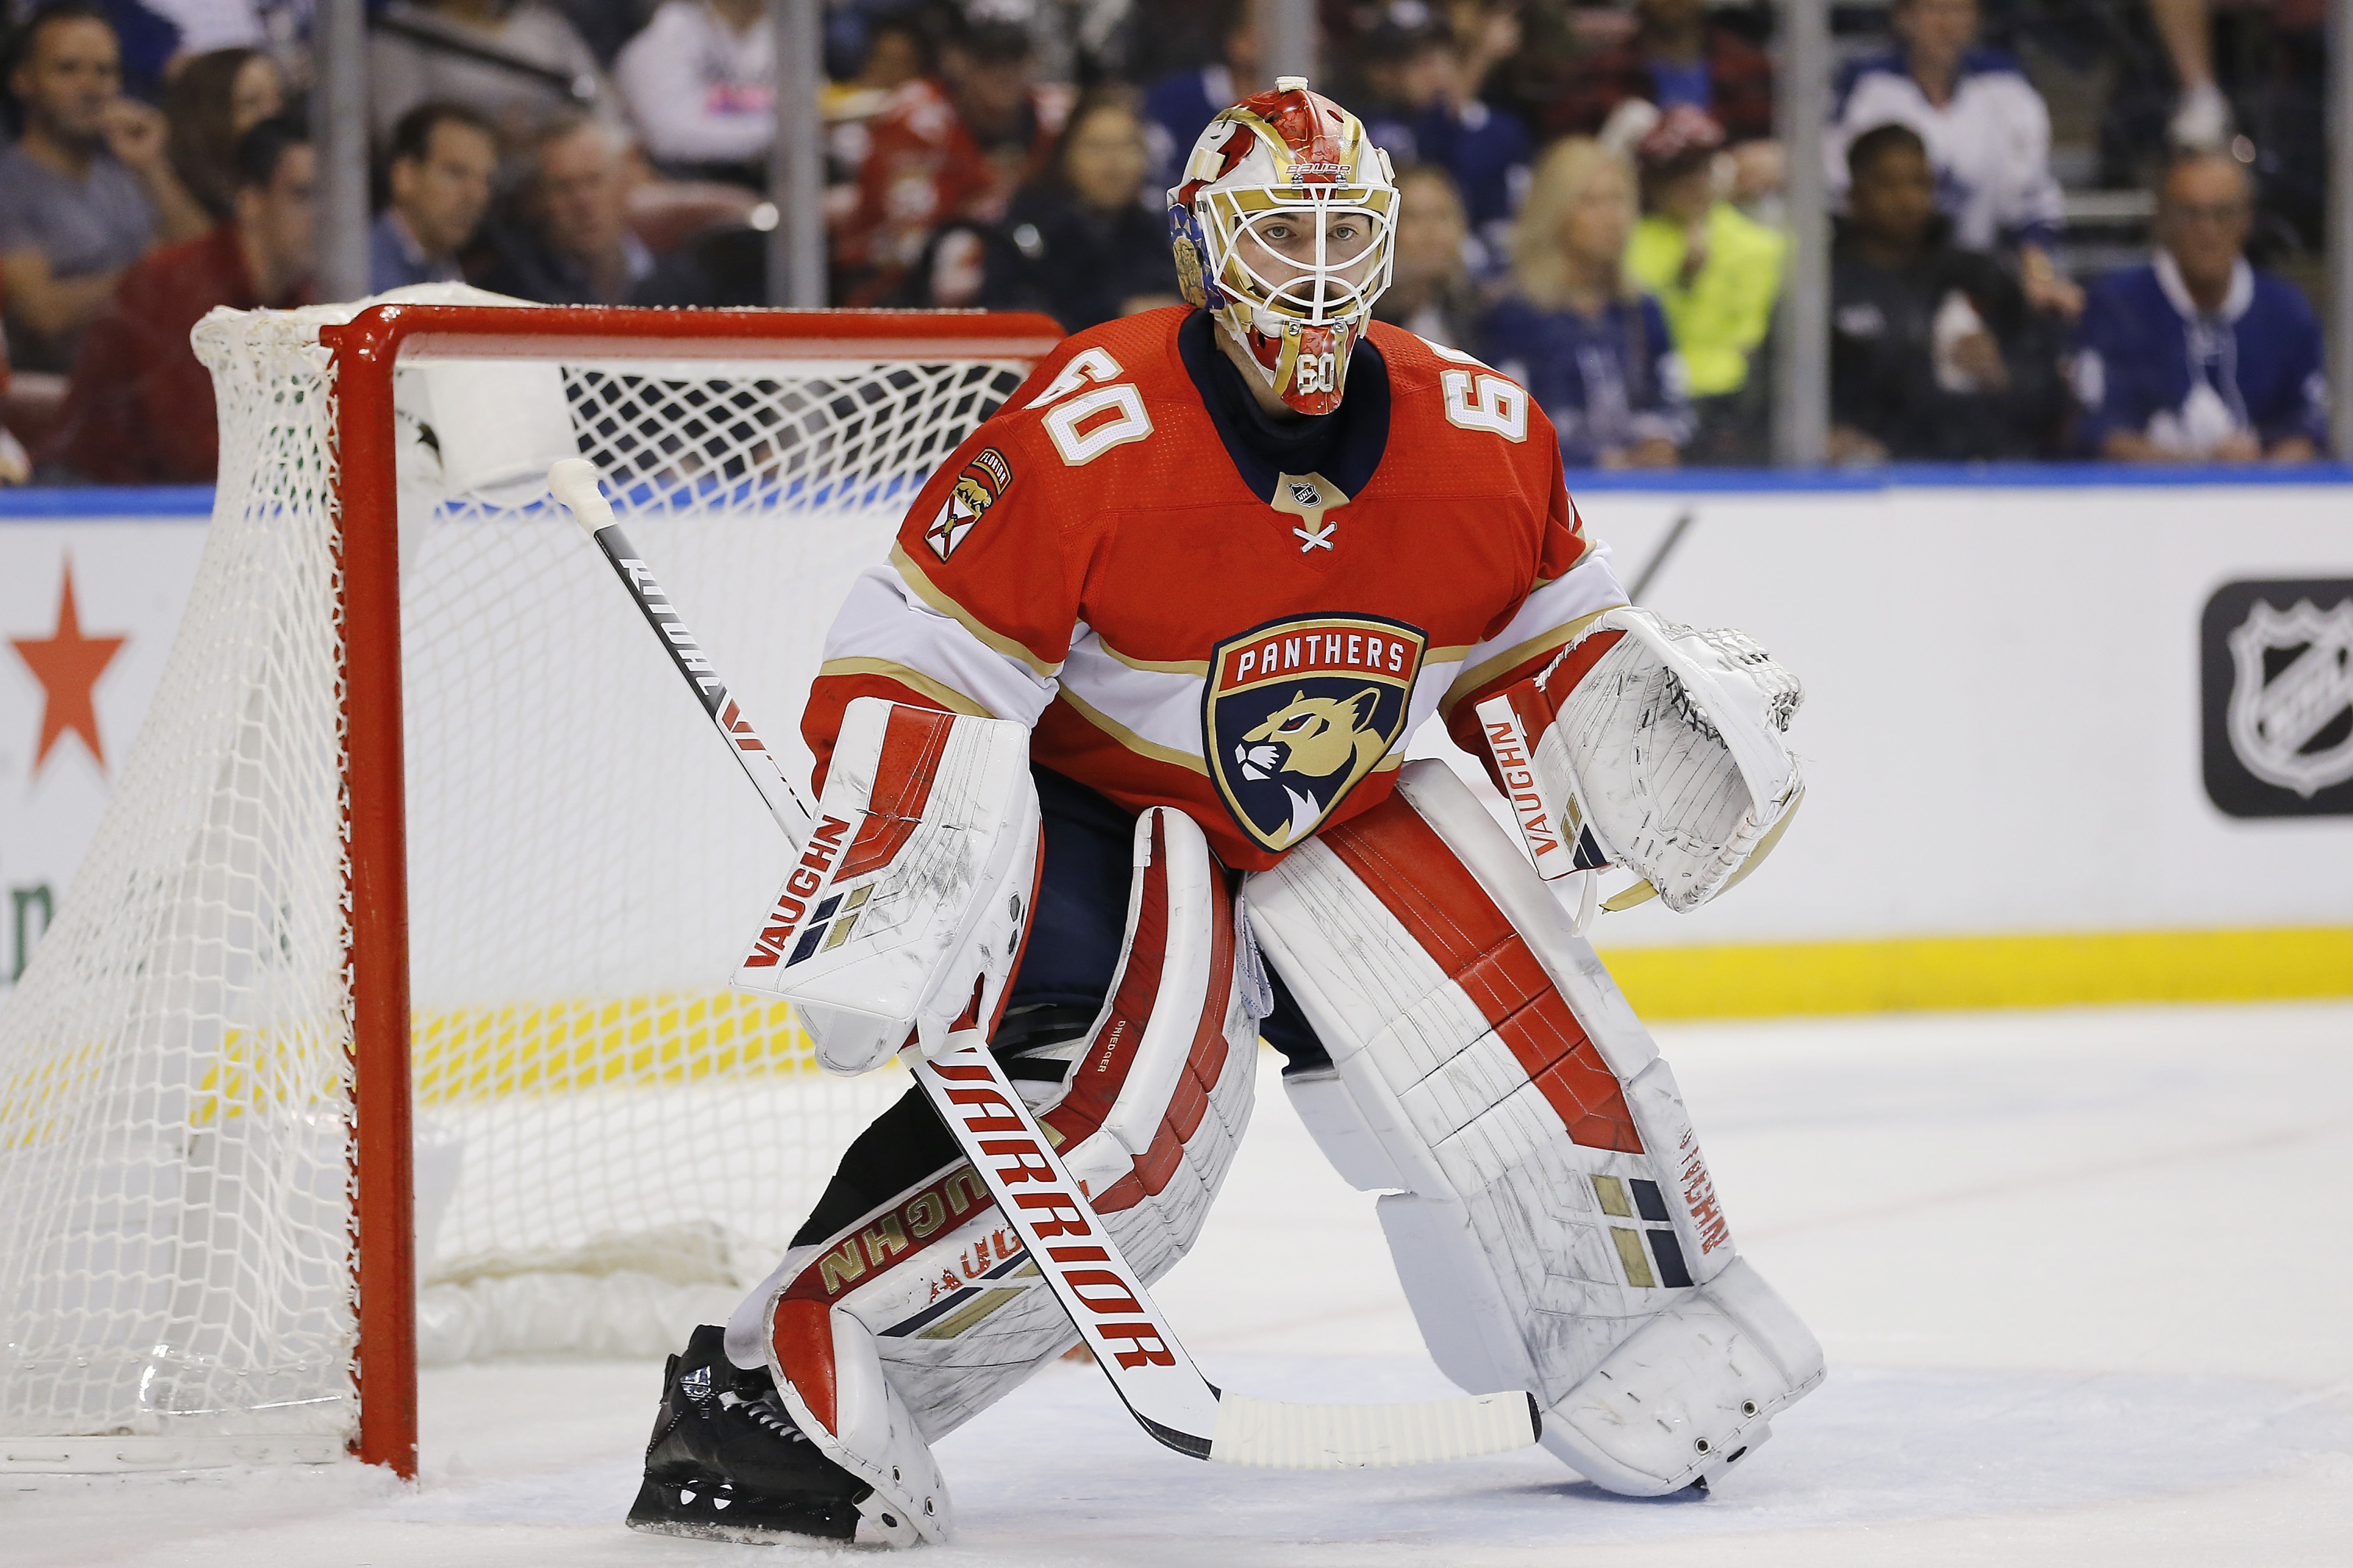 Chris Driedger will start Game 2 for the Florida Panthers - Daily